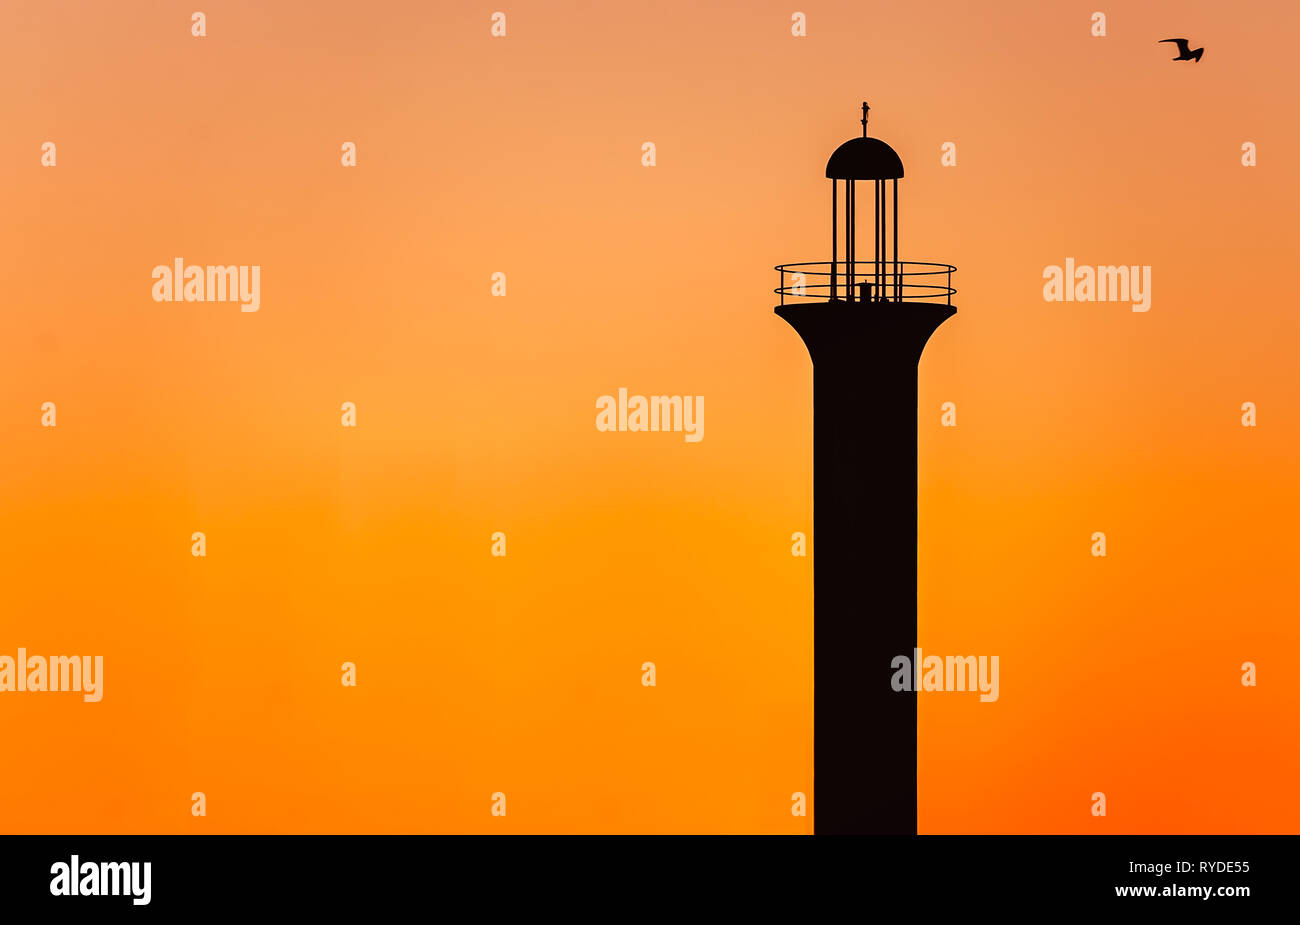 The sun sets on the Broadwater Beach Marina channel lighthouse, Feb. 24, 2019, in Biloxi, Mississippi. Stock Photo